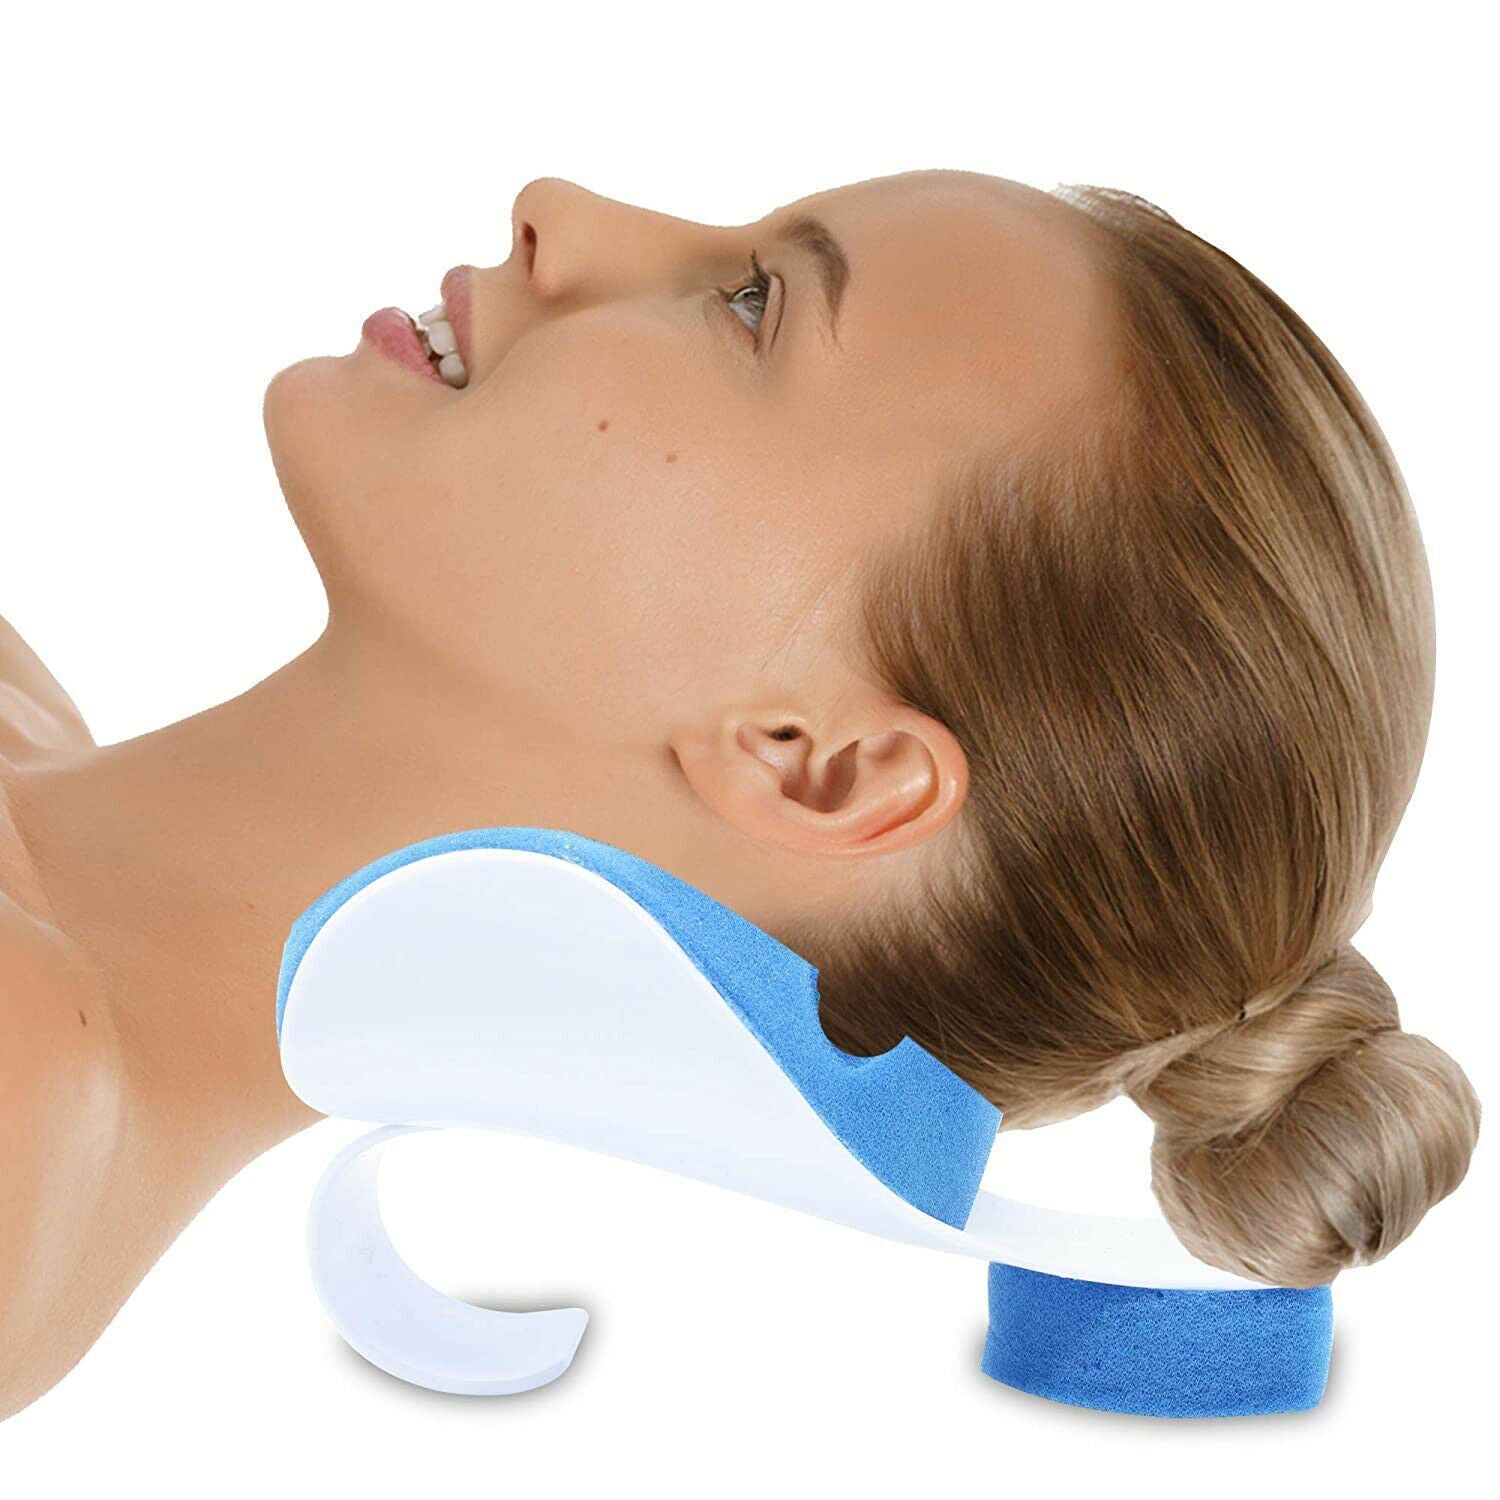 Cervical Pillow For Neck Pain Relief Neck Support